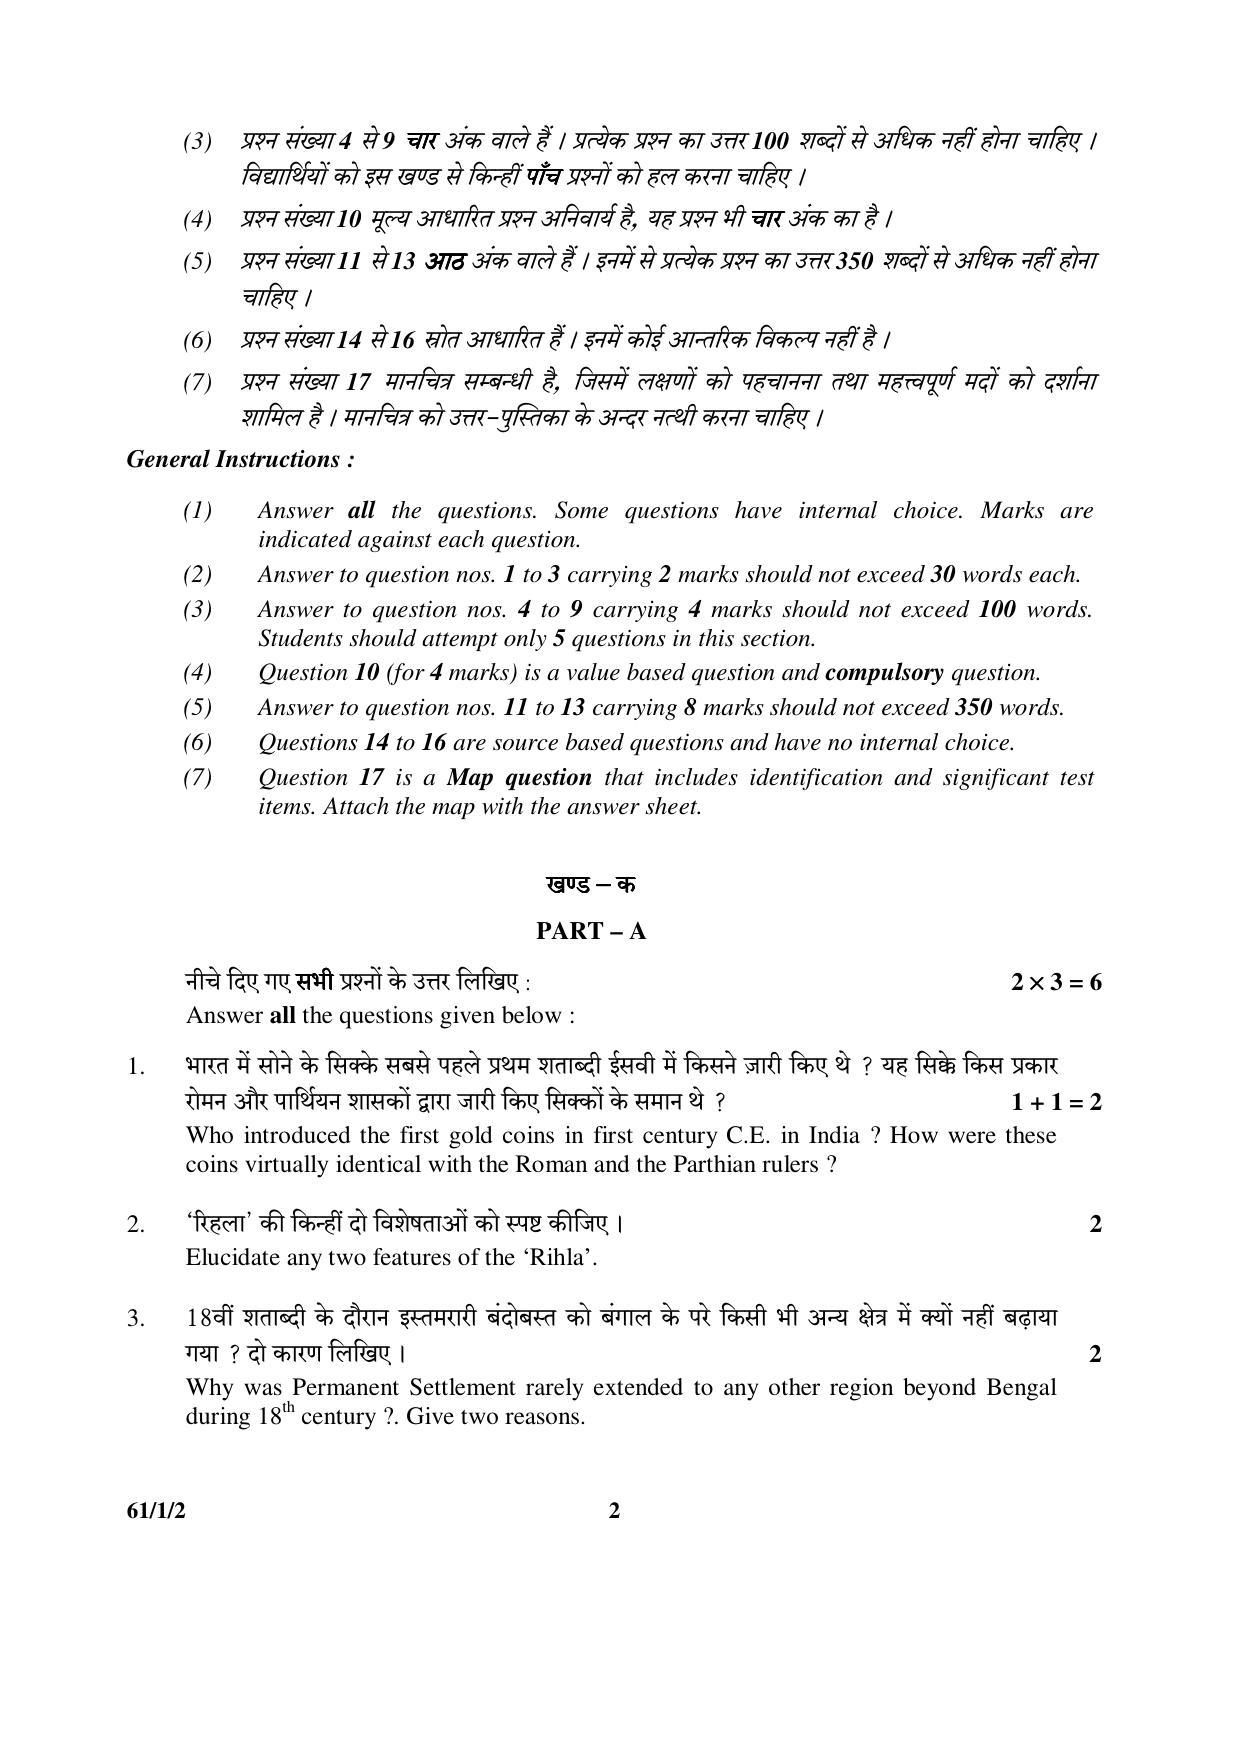 CBSE Class 12 61-1-2  (History) 2017-comptt Question Paper - Page 2